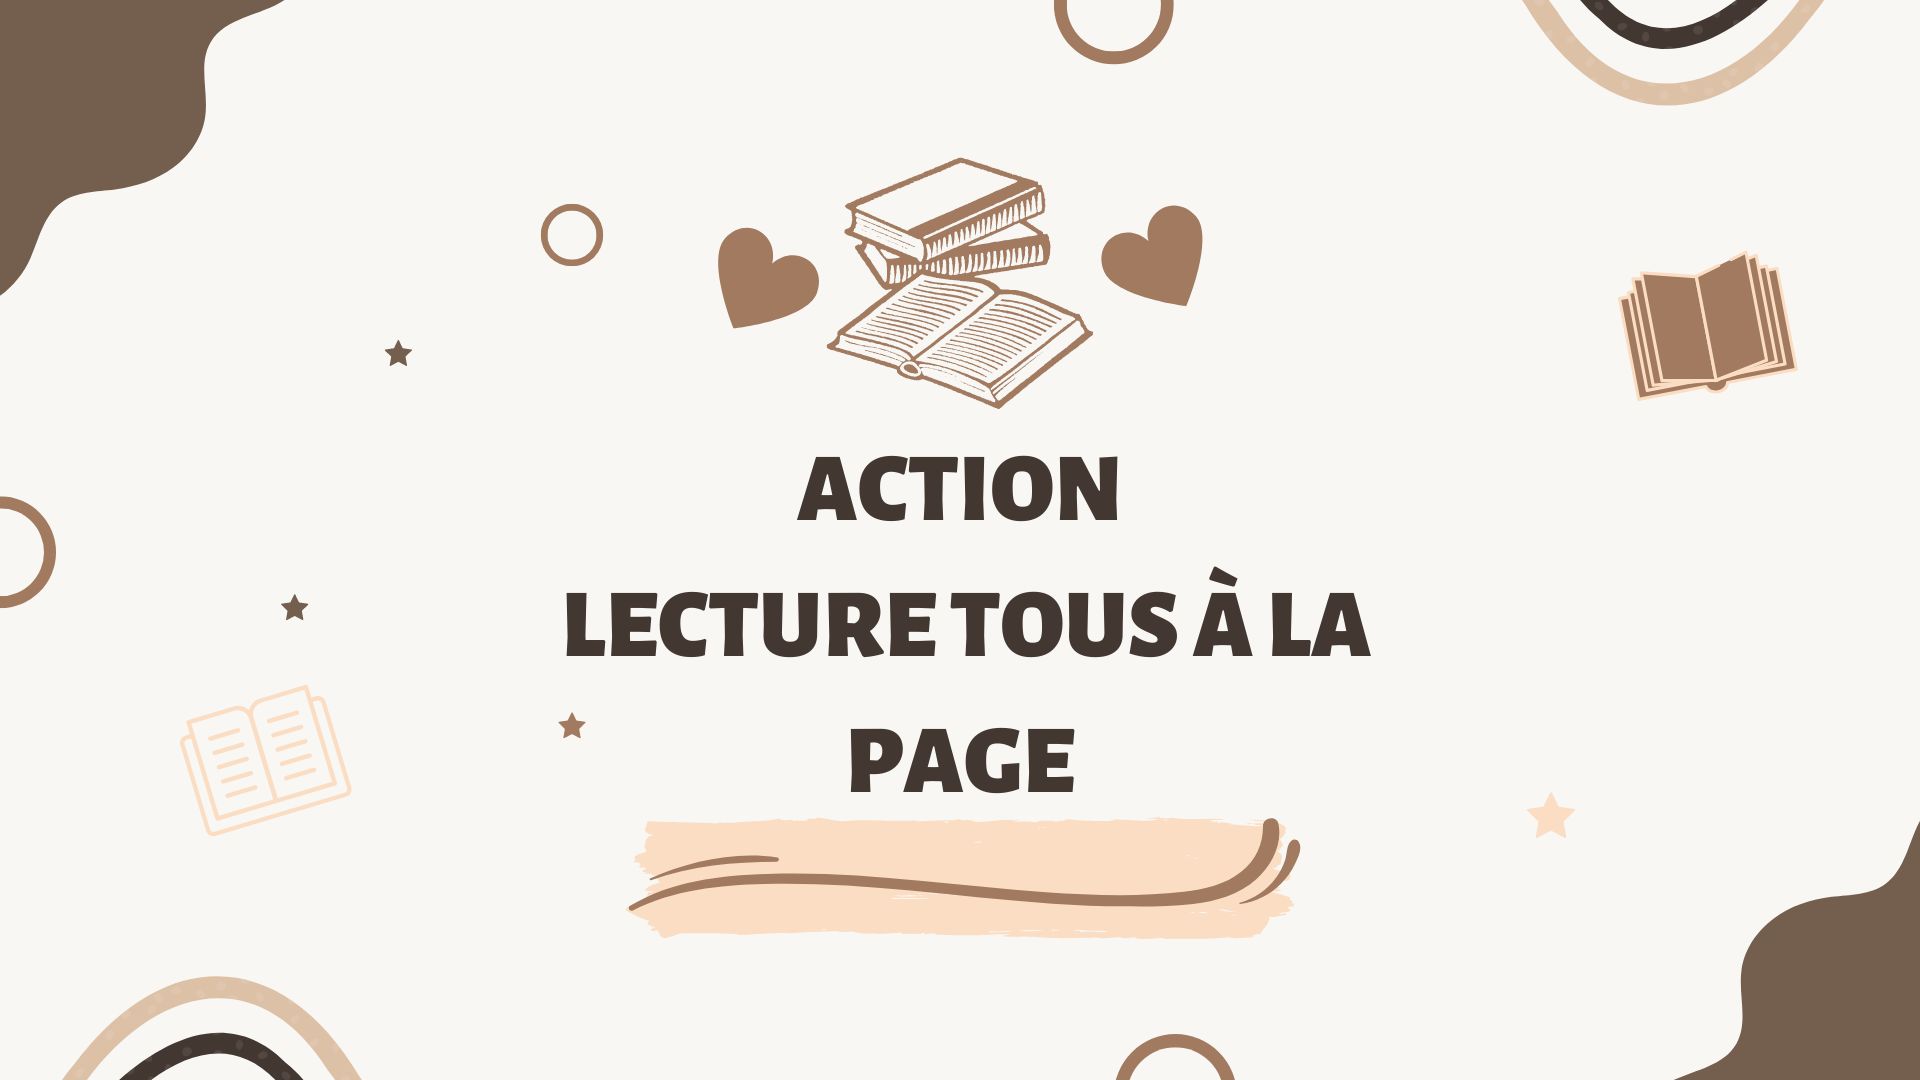 You are currently viewing ACTION LECTURE TOUS A LA PAGE